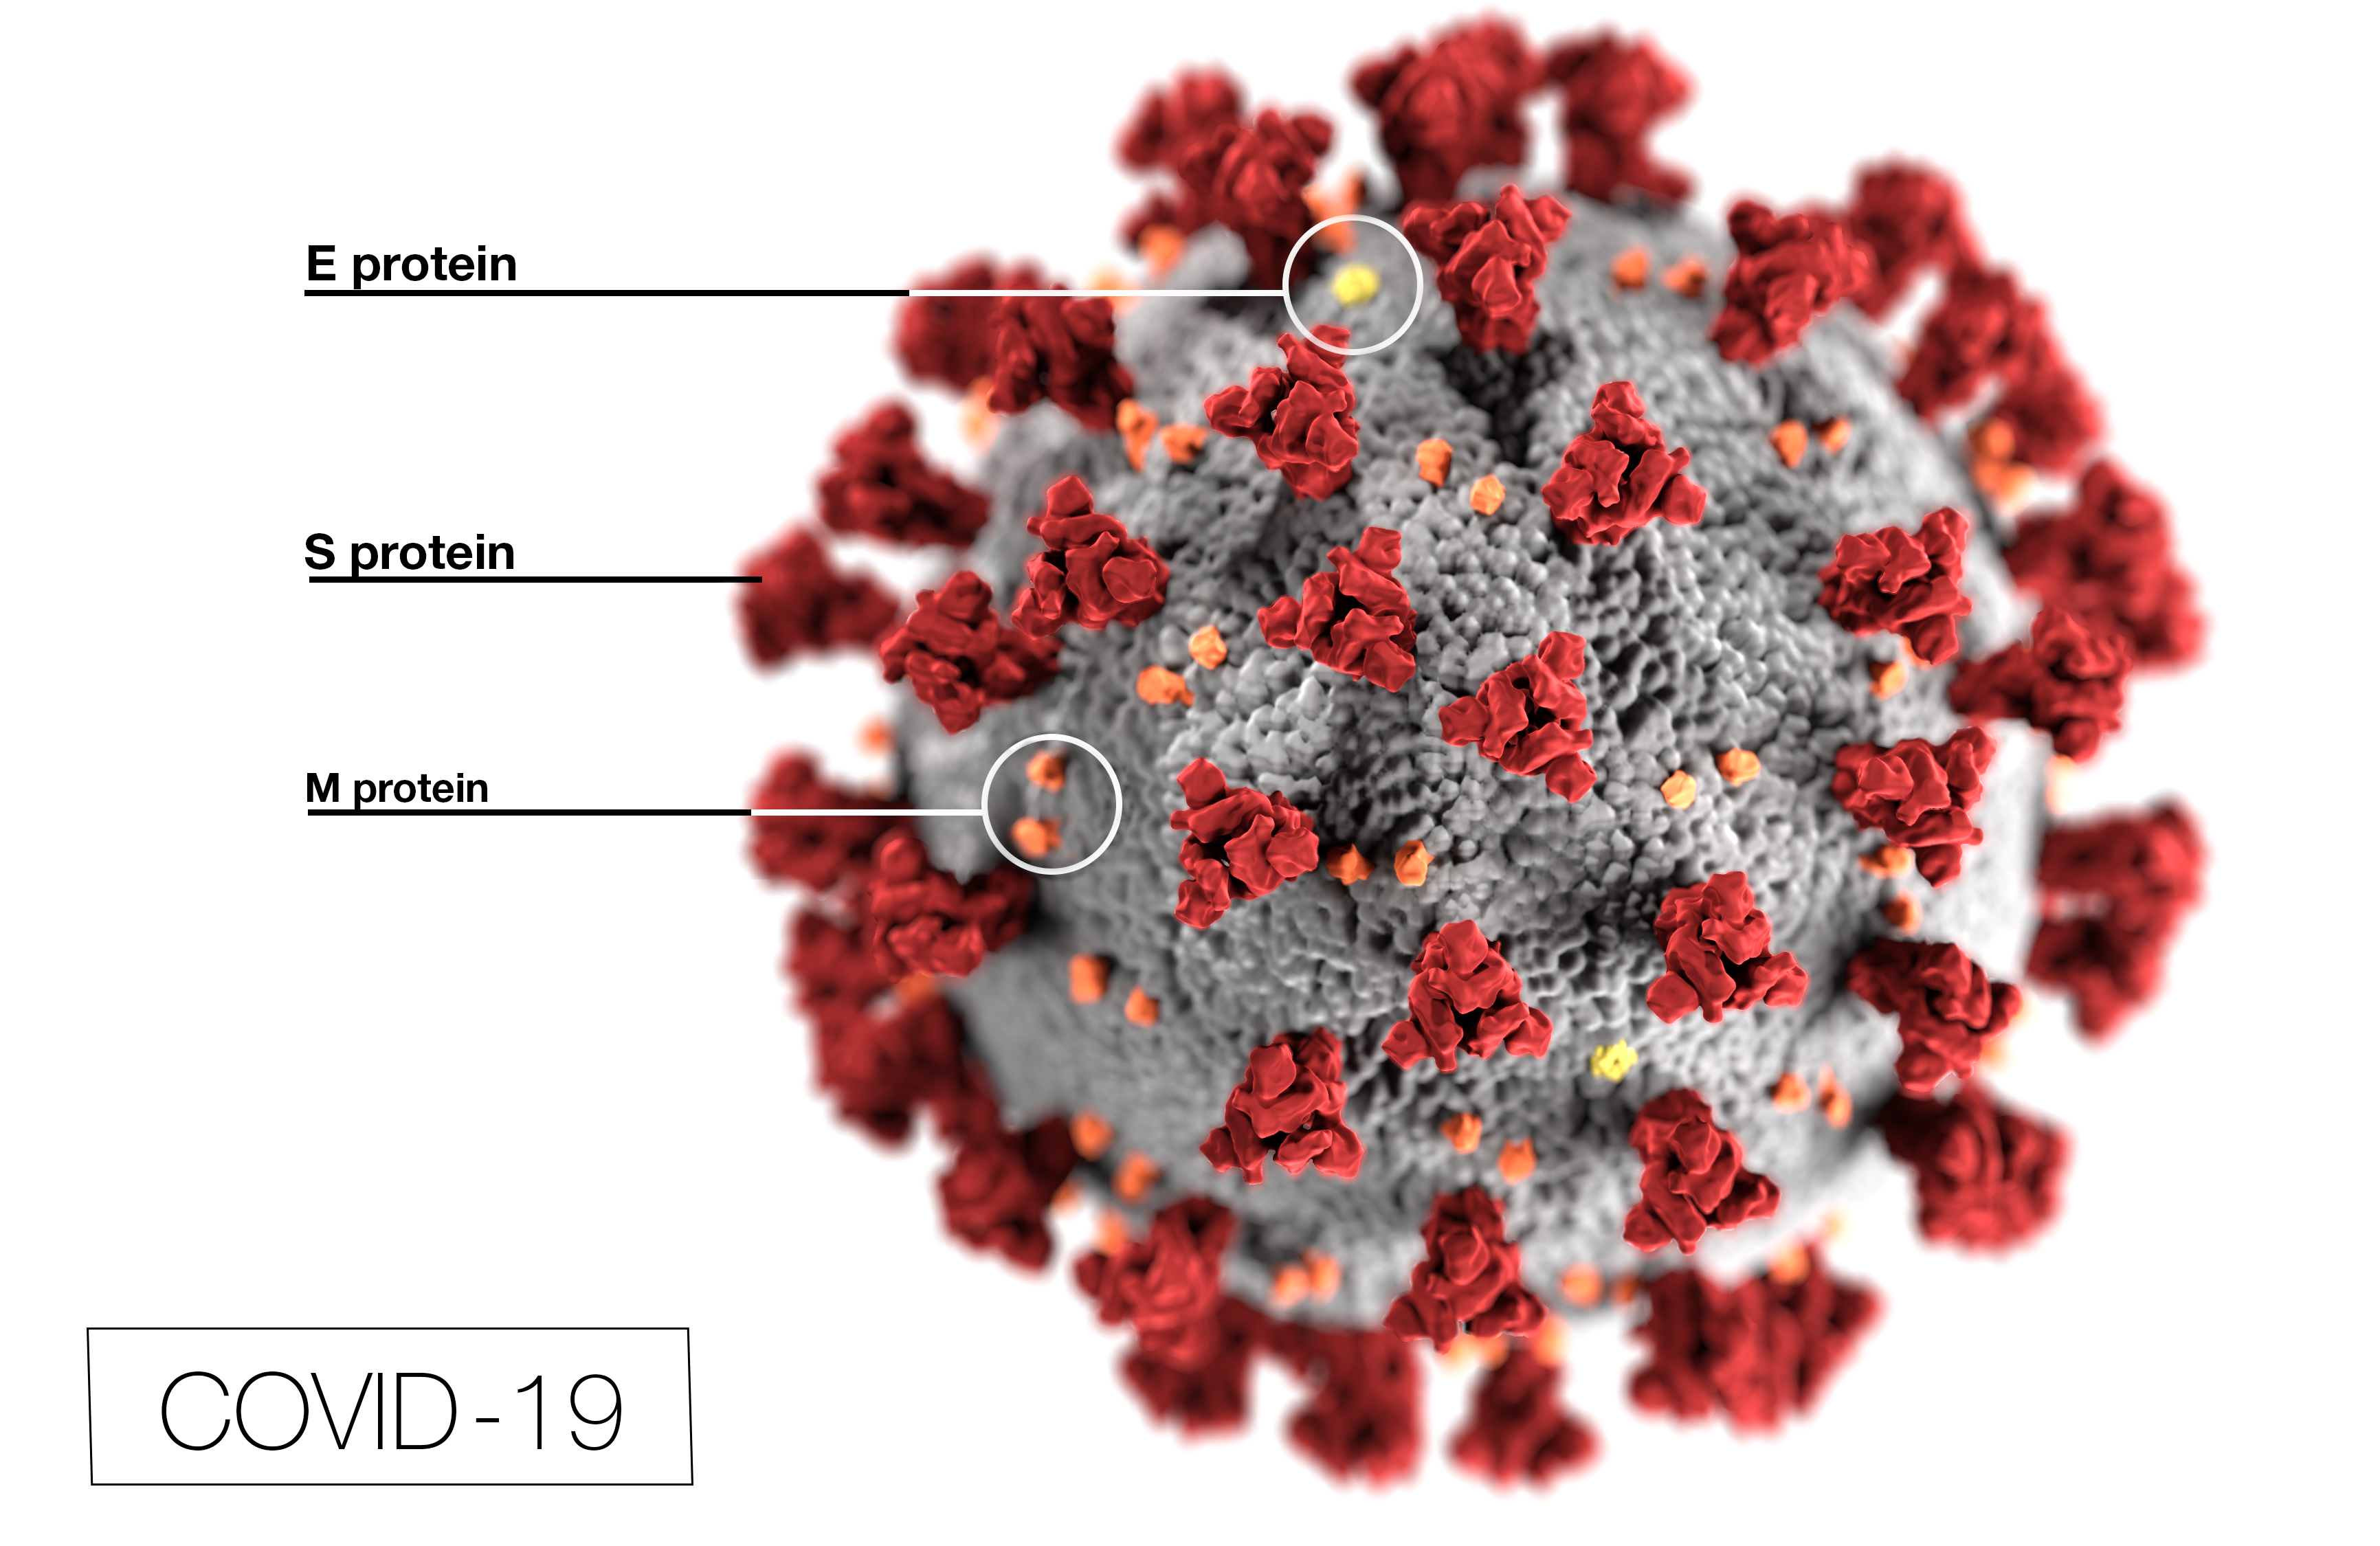 Ultrastructural morphology exhibited by coronaviruses highlighting the protein particles E, S, and M located on the outer surface of the SARS-COV-2 virion. Source: Public Health Image Library (PHIL, ID #23312).